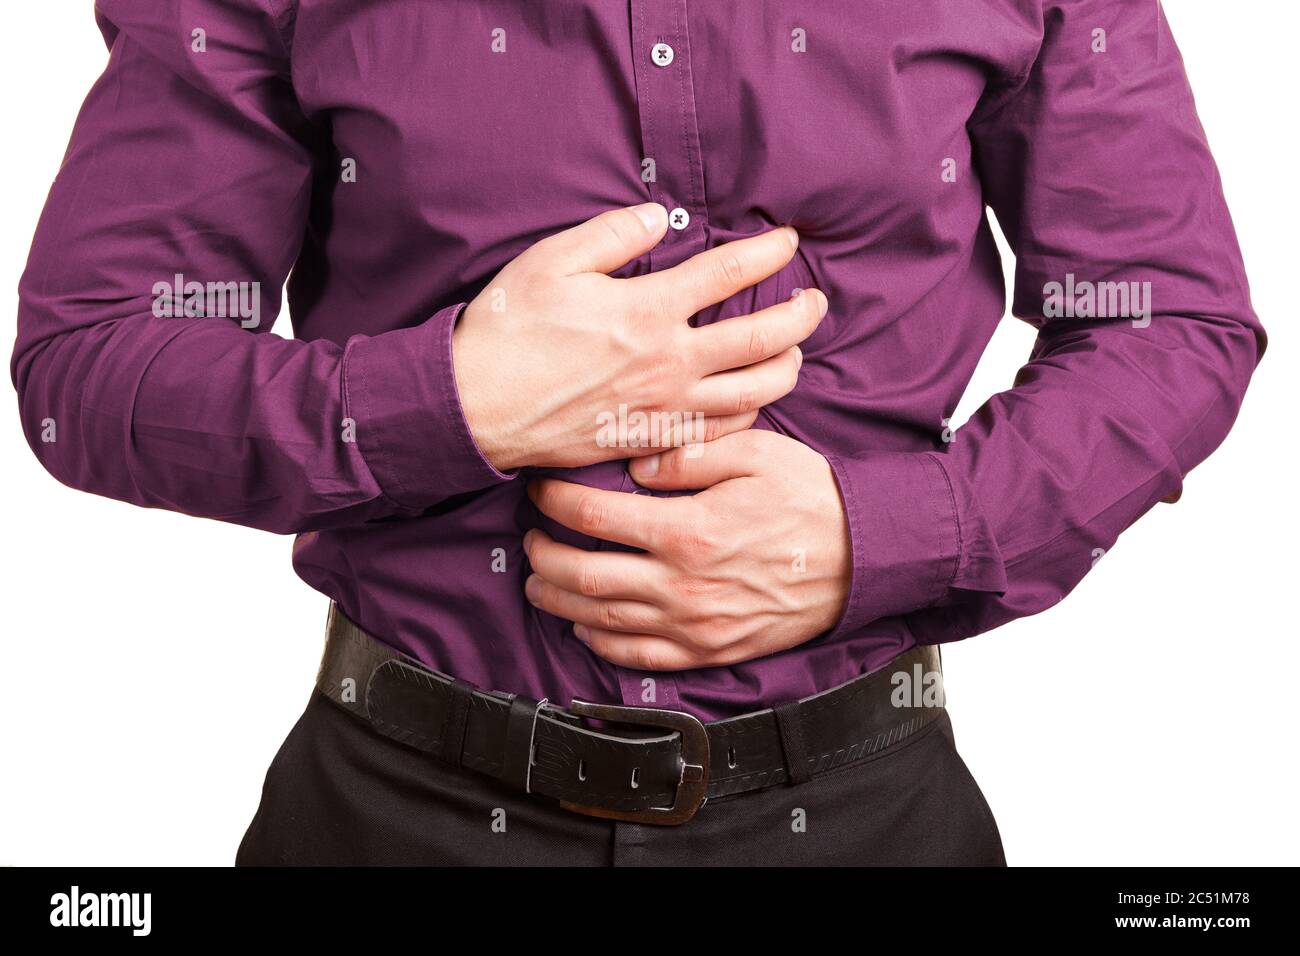 Young man with stomach ache holds hands to stomach Stock Photo